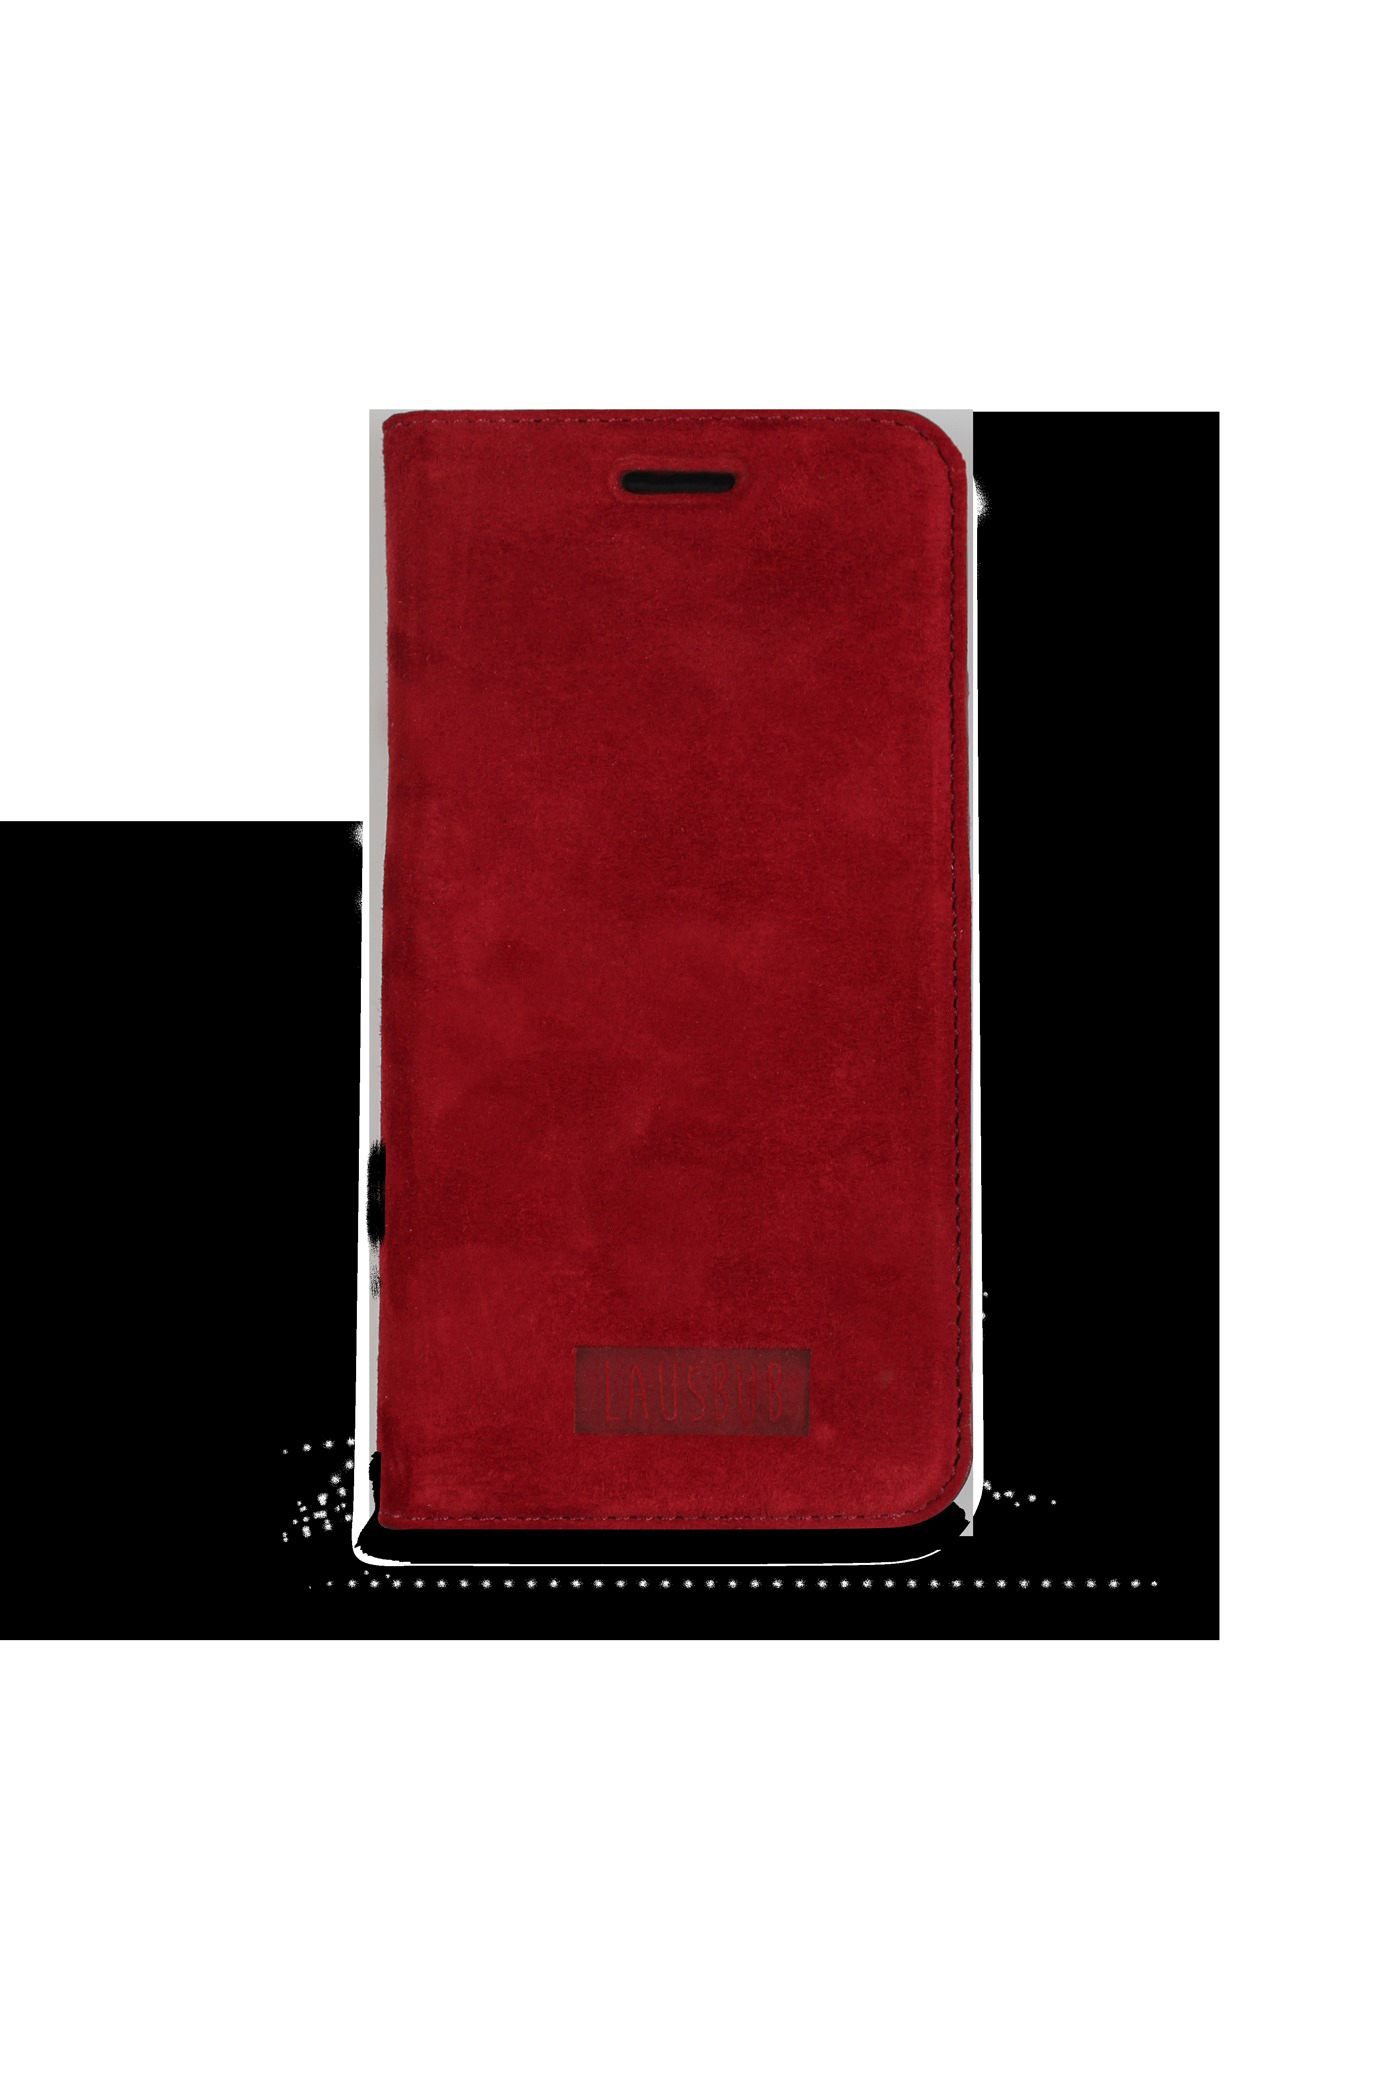 LAUSBUB Frechdachs, Bookcover, 6s, 6, Tender Apple, iPhone iPhone Red